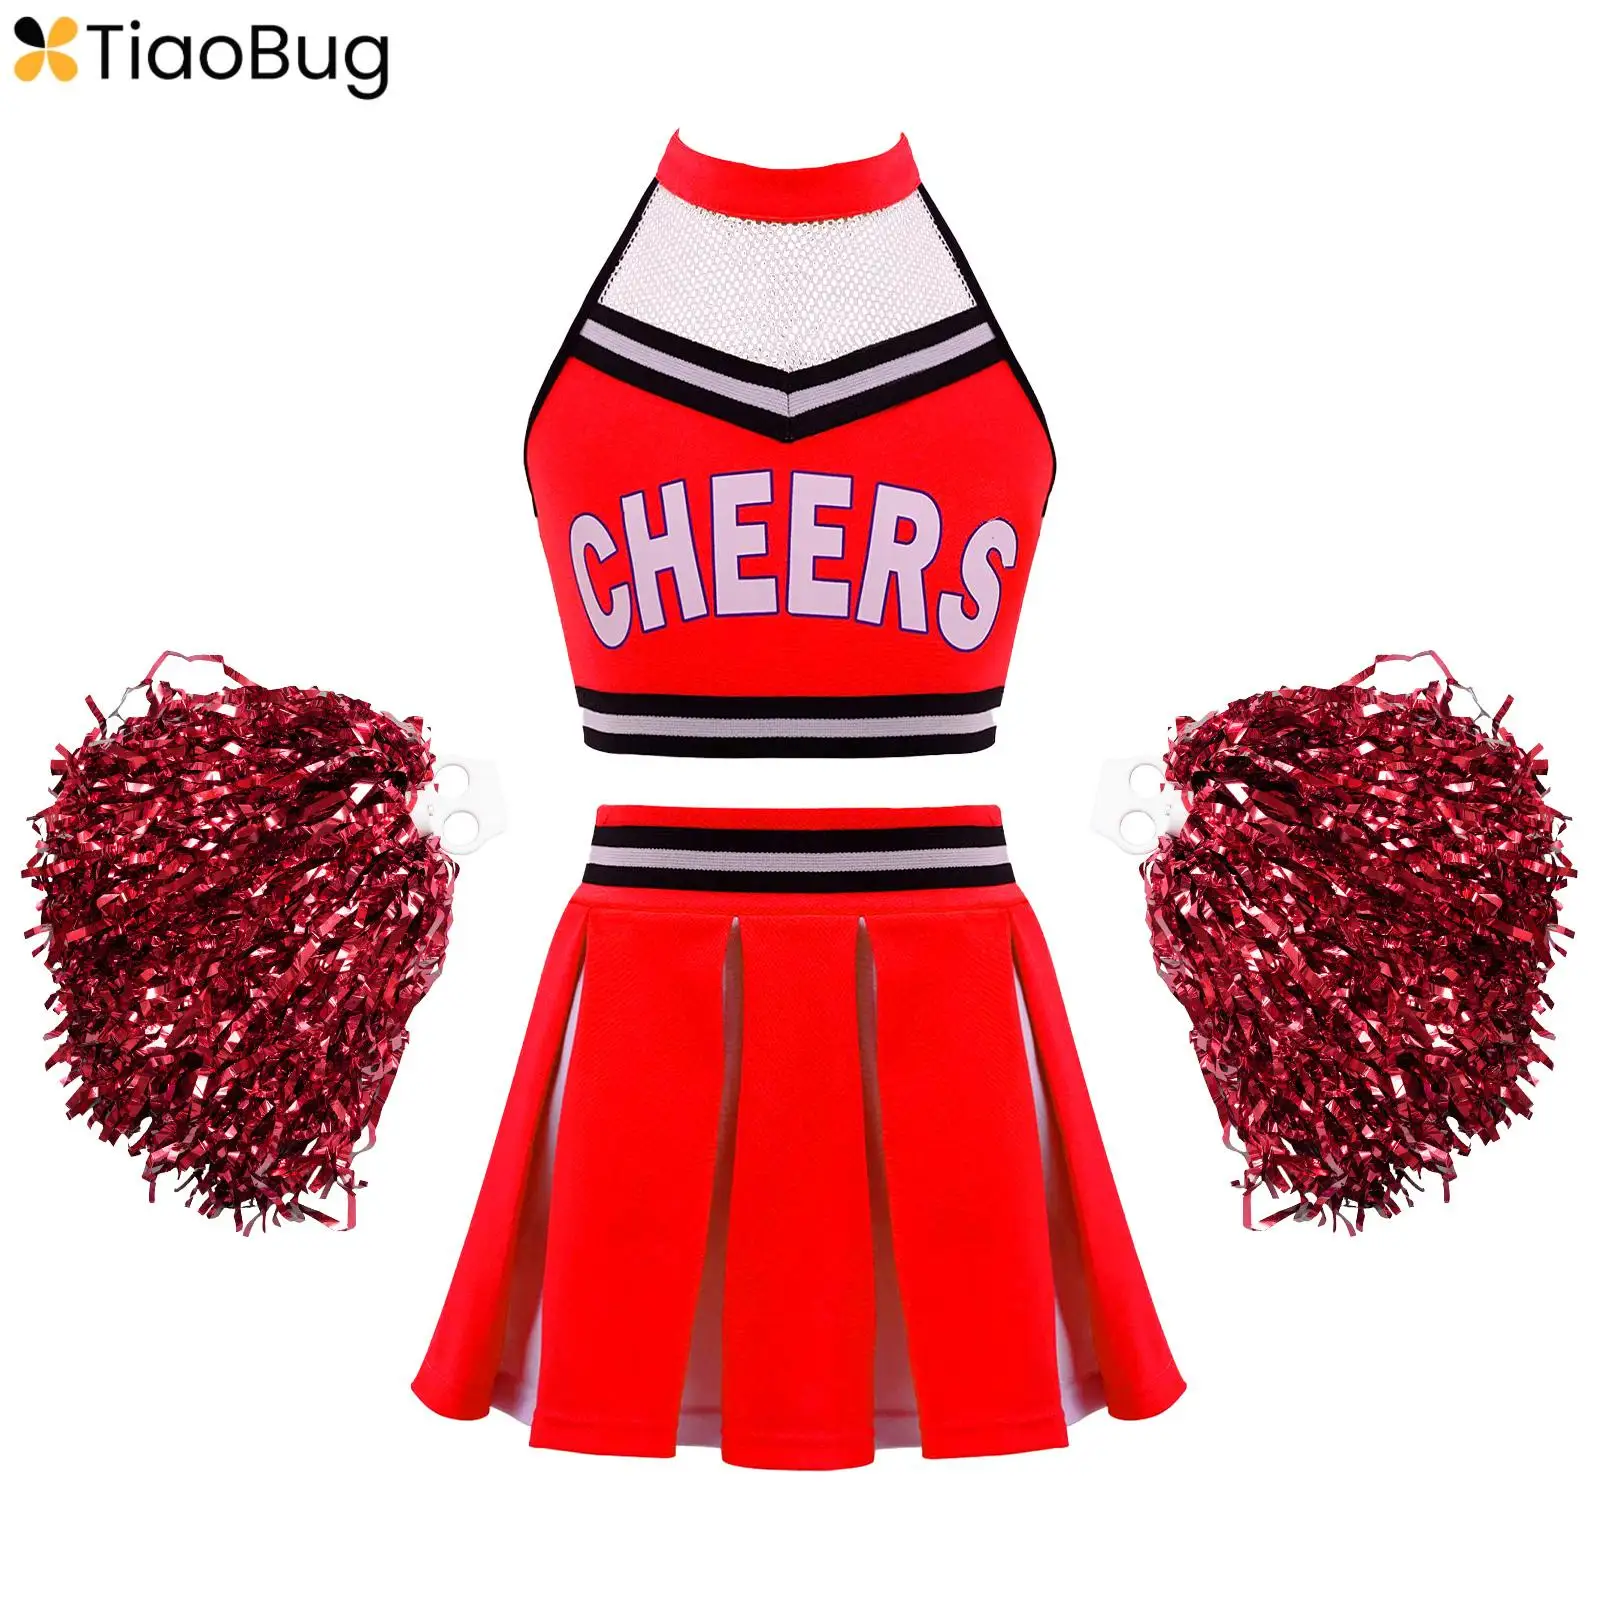 

Kids Girls Cheerleader Costume Cheerleading Uniform High School Top with Pleated Skirt Sets Carnival Dance Outfits and Pom Poms